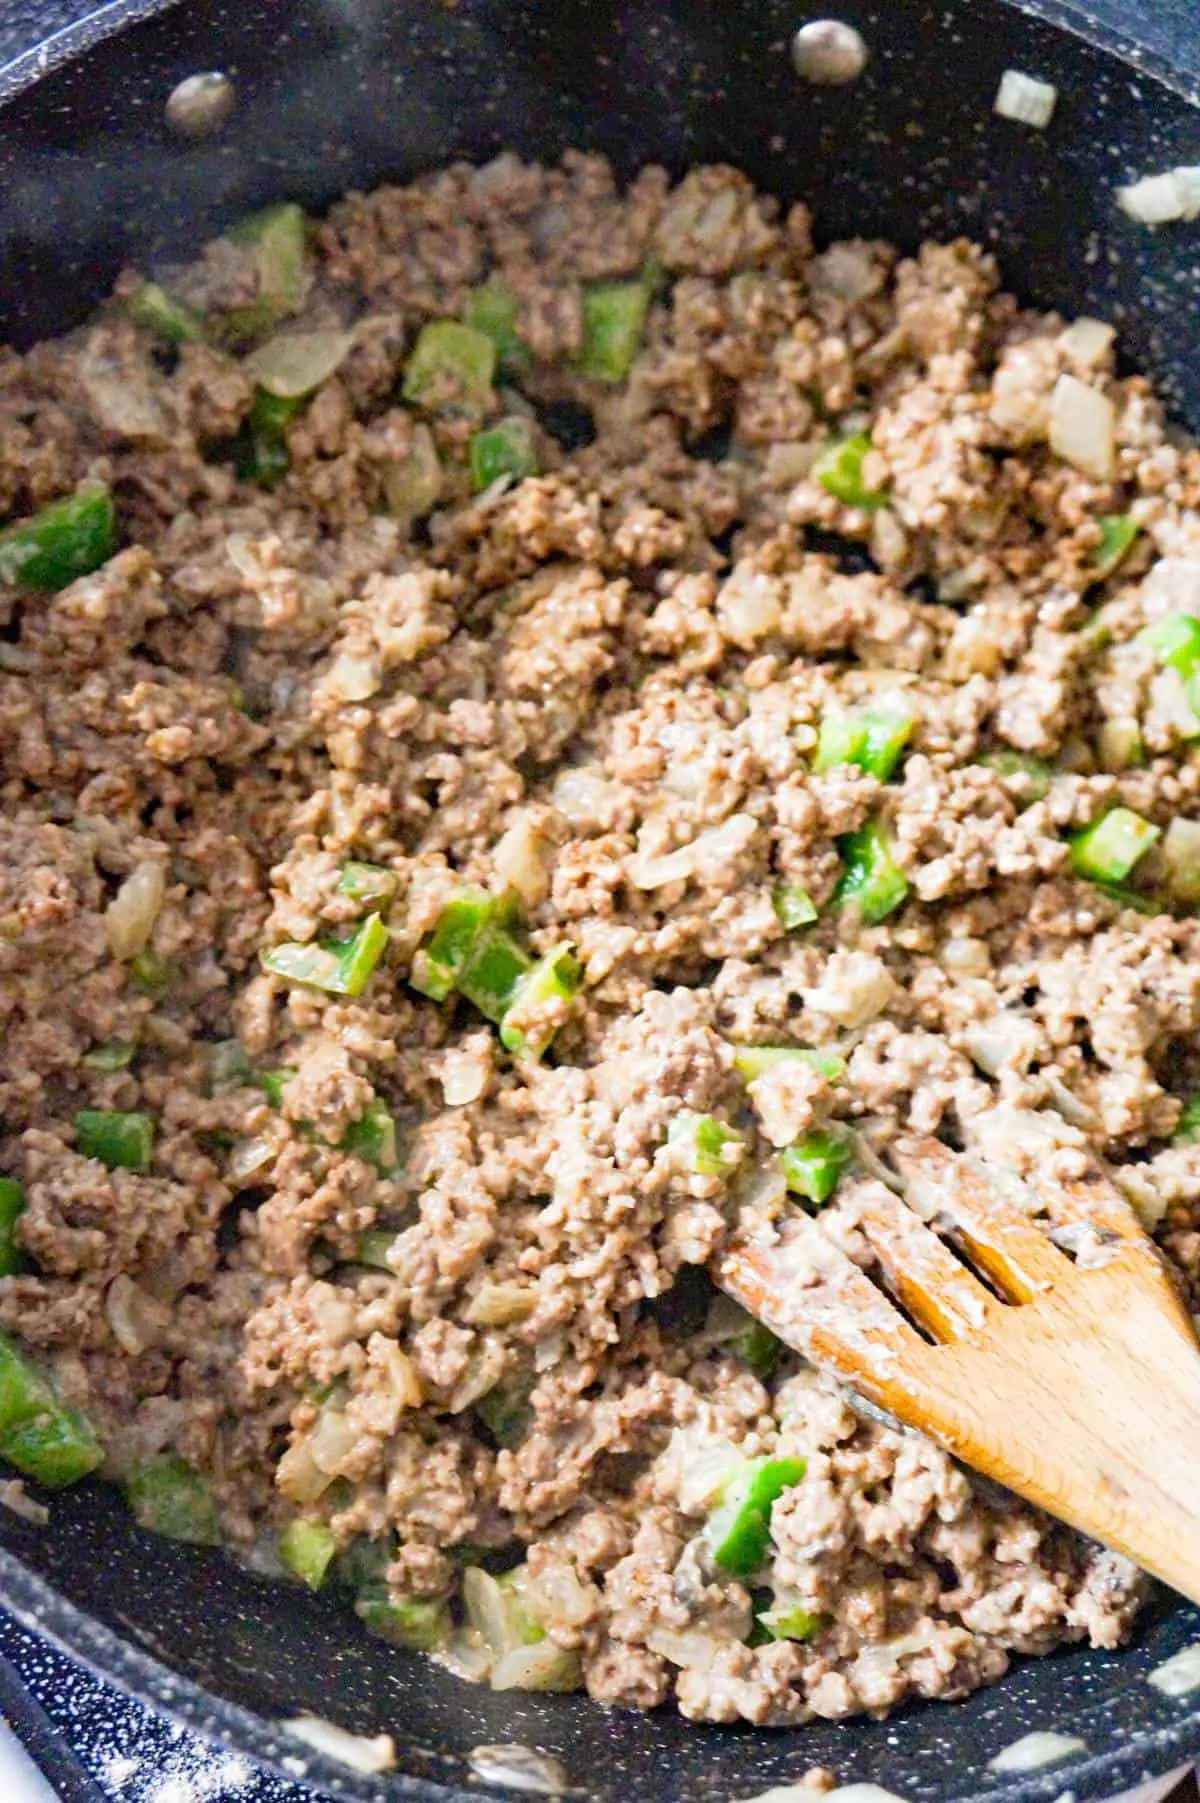 ground beef mixture in a saute pan